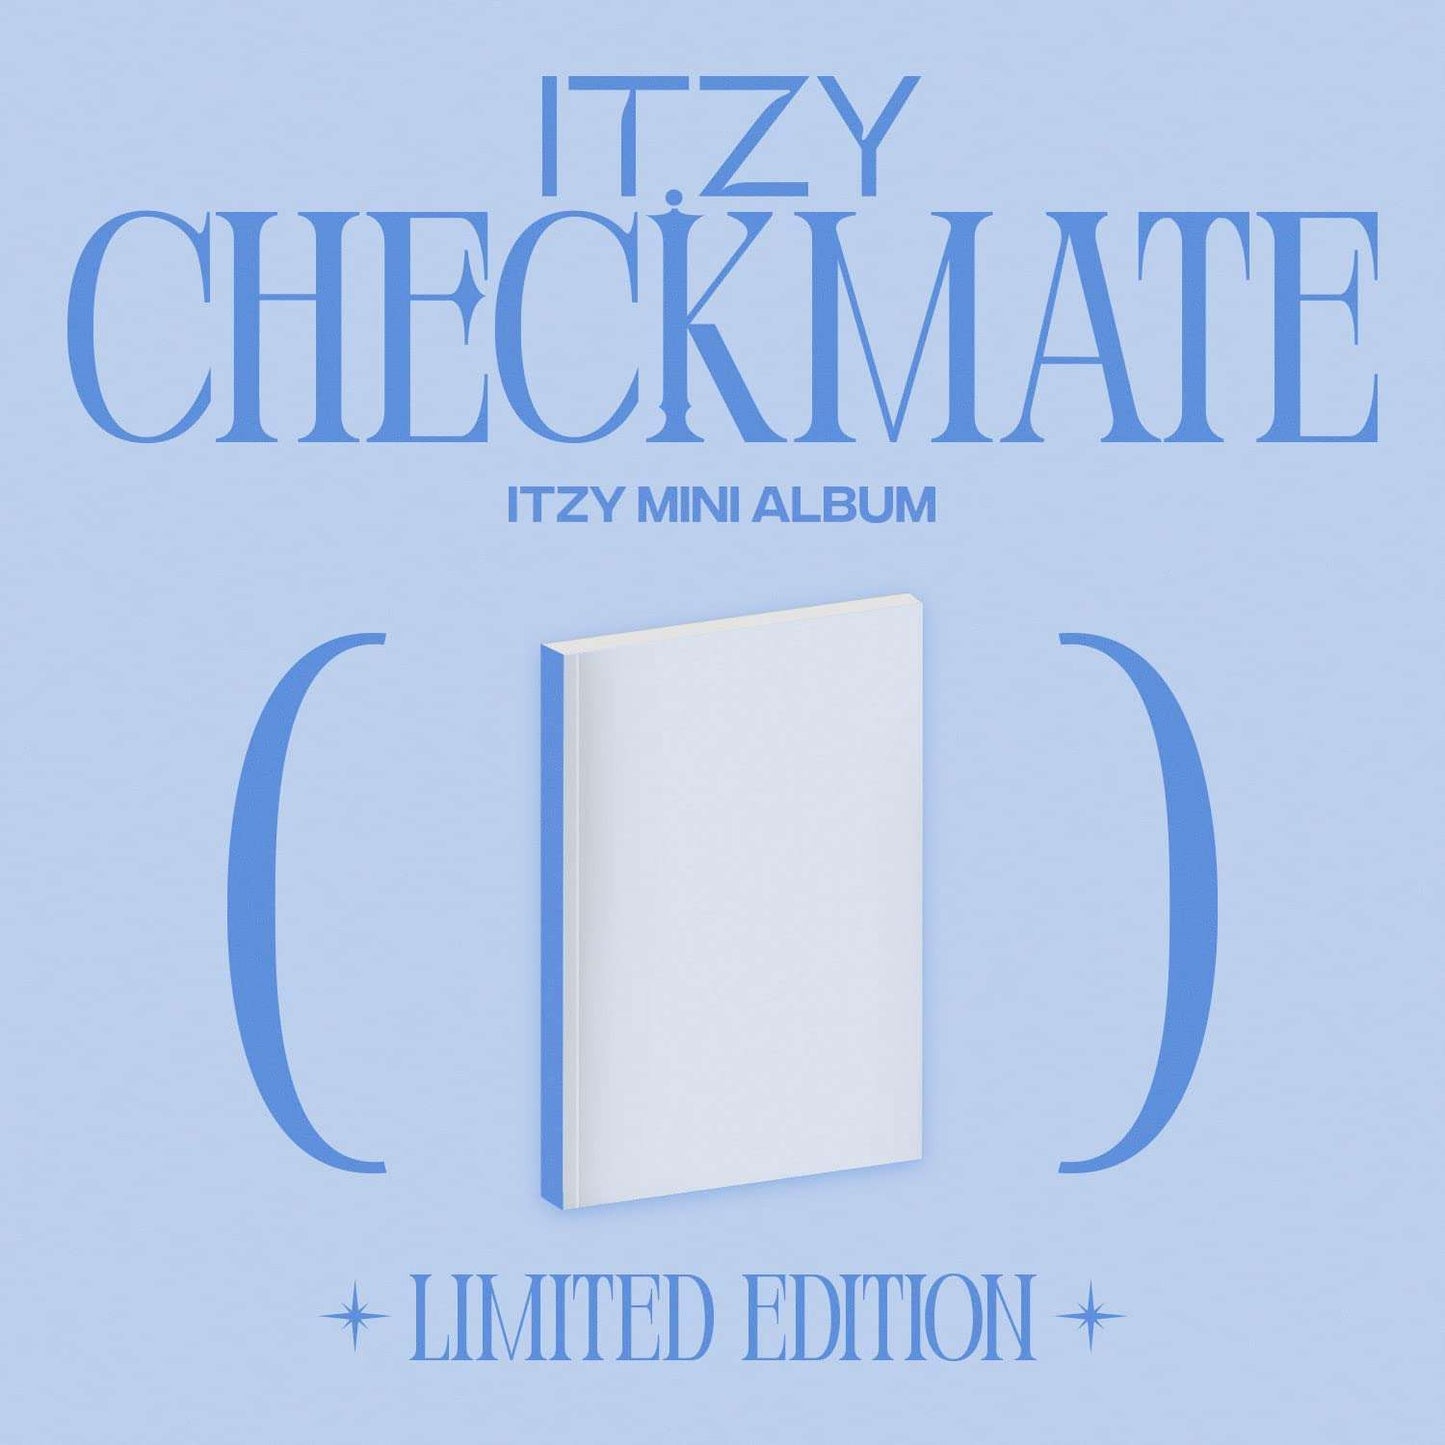 Itzy Checkmate Limited Version